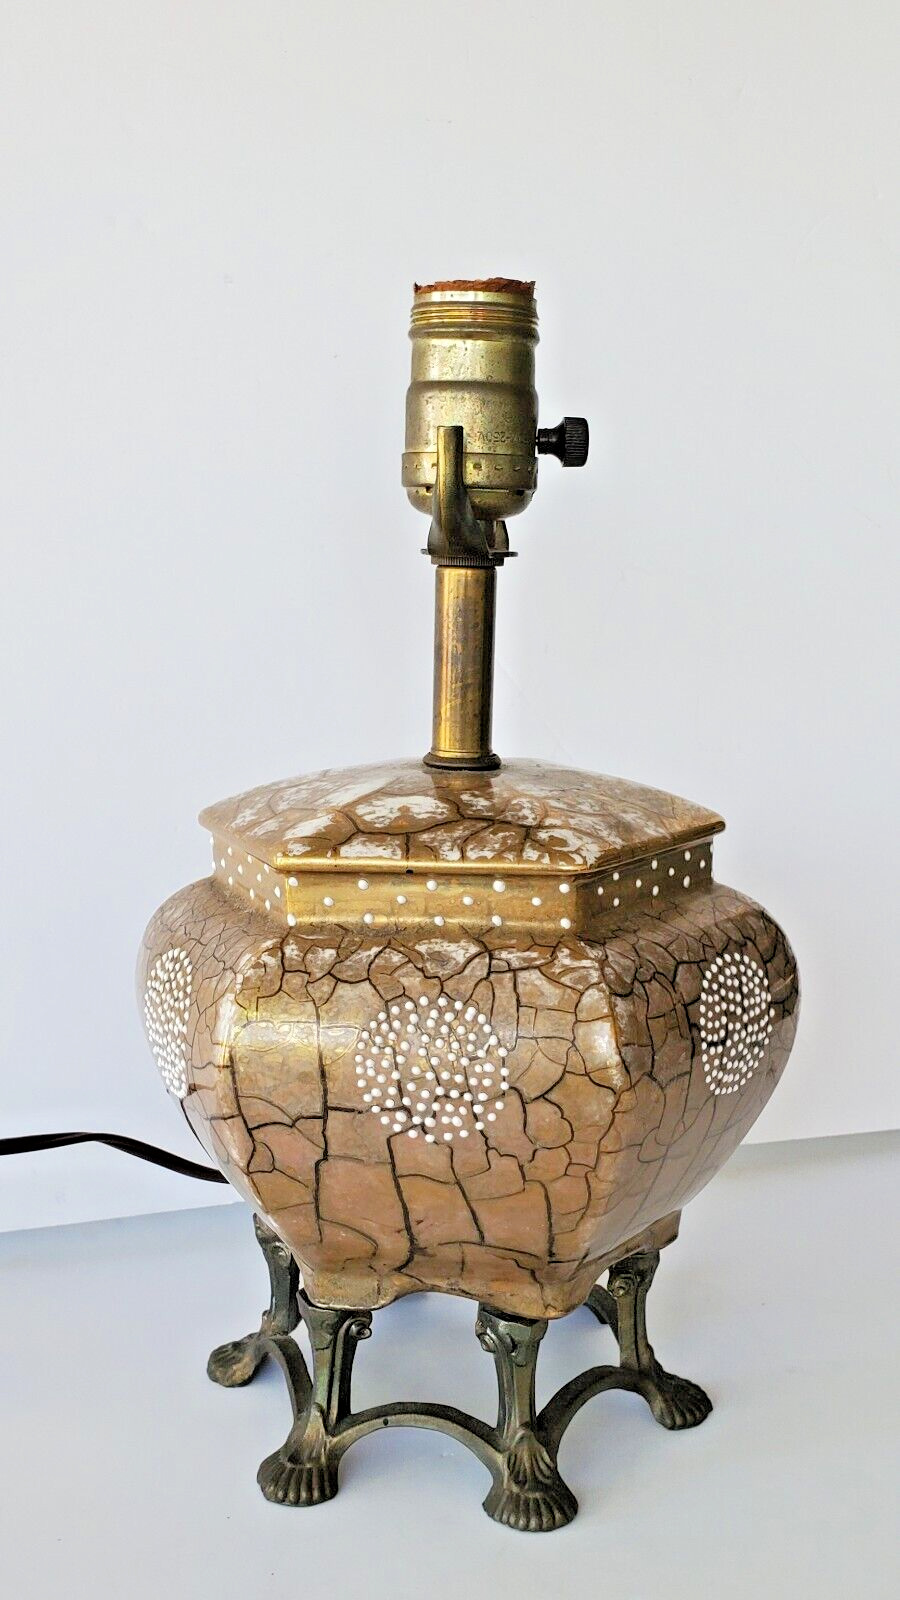 Vintage Asian Style Porcelain Brass Chinoiserie Moriage Claw Footed Table Lamp